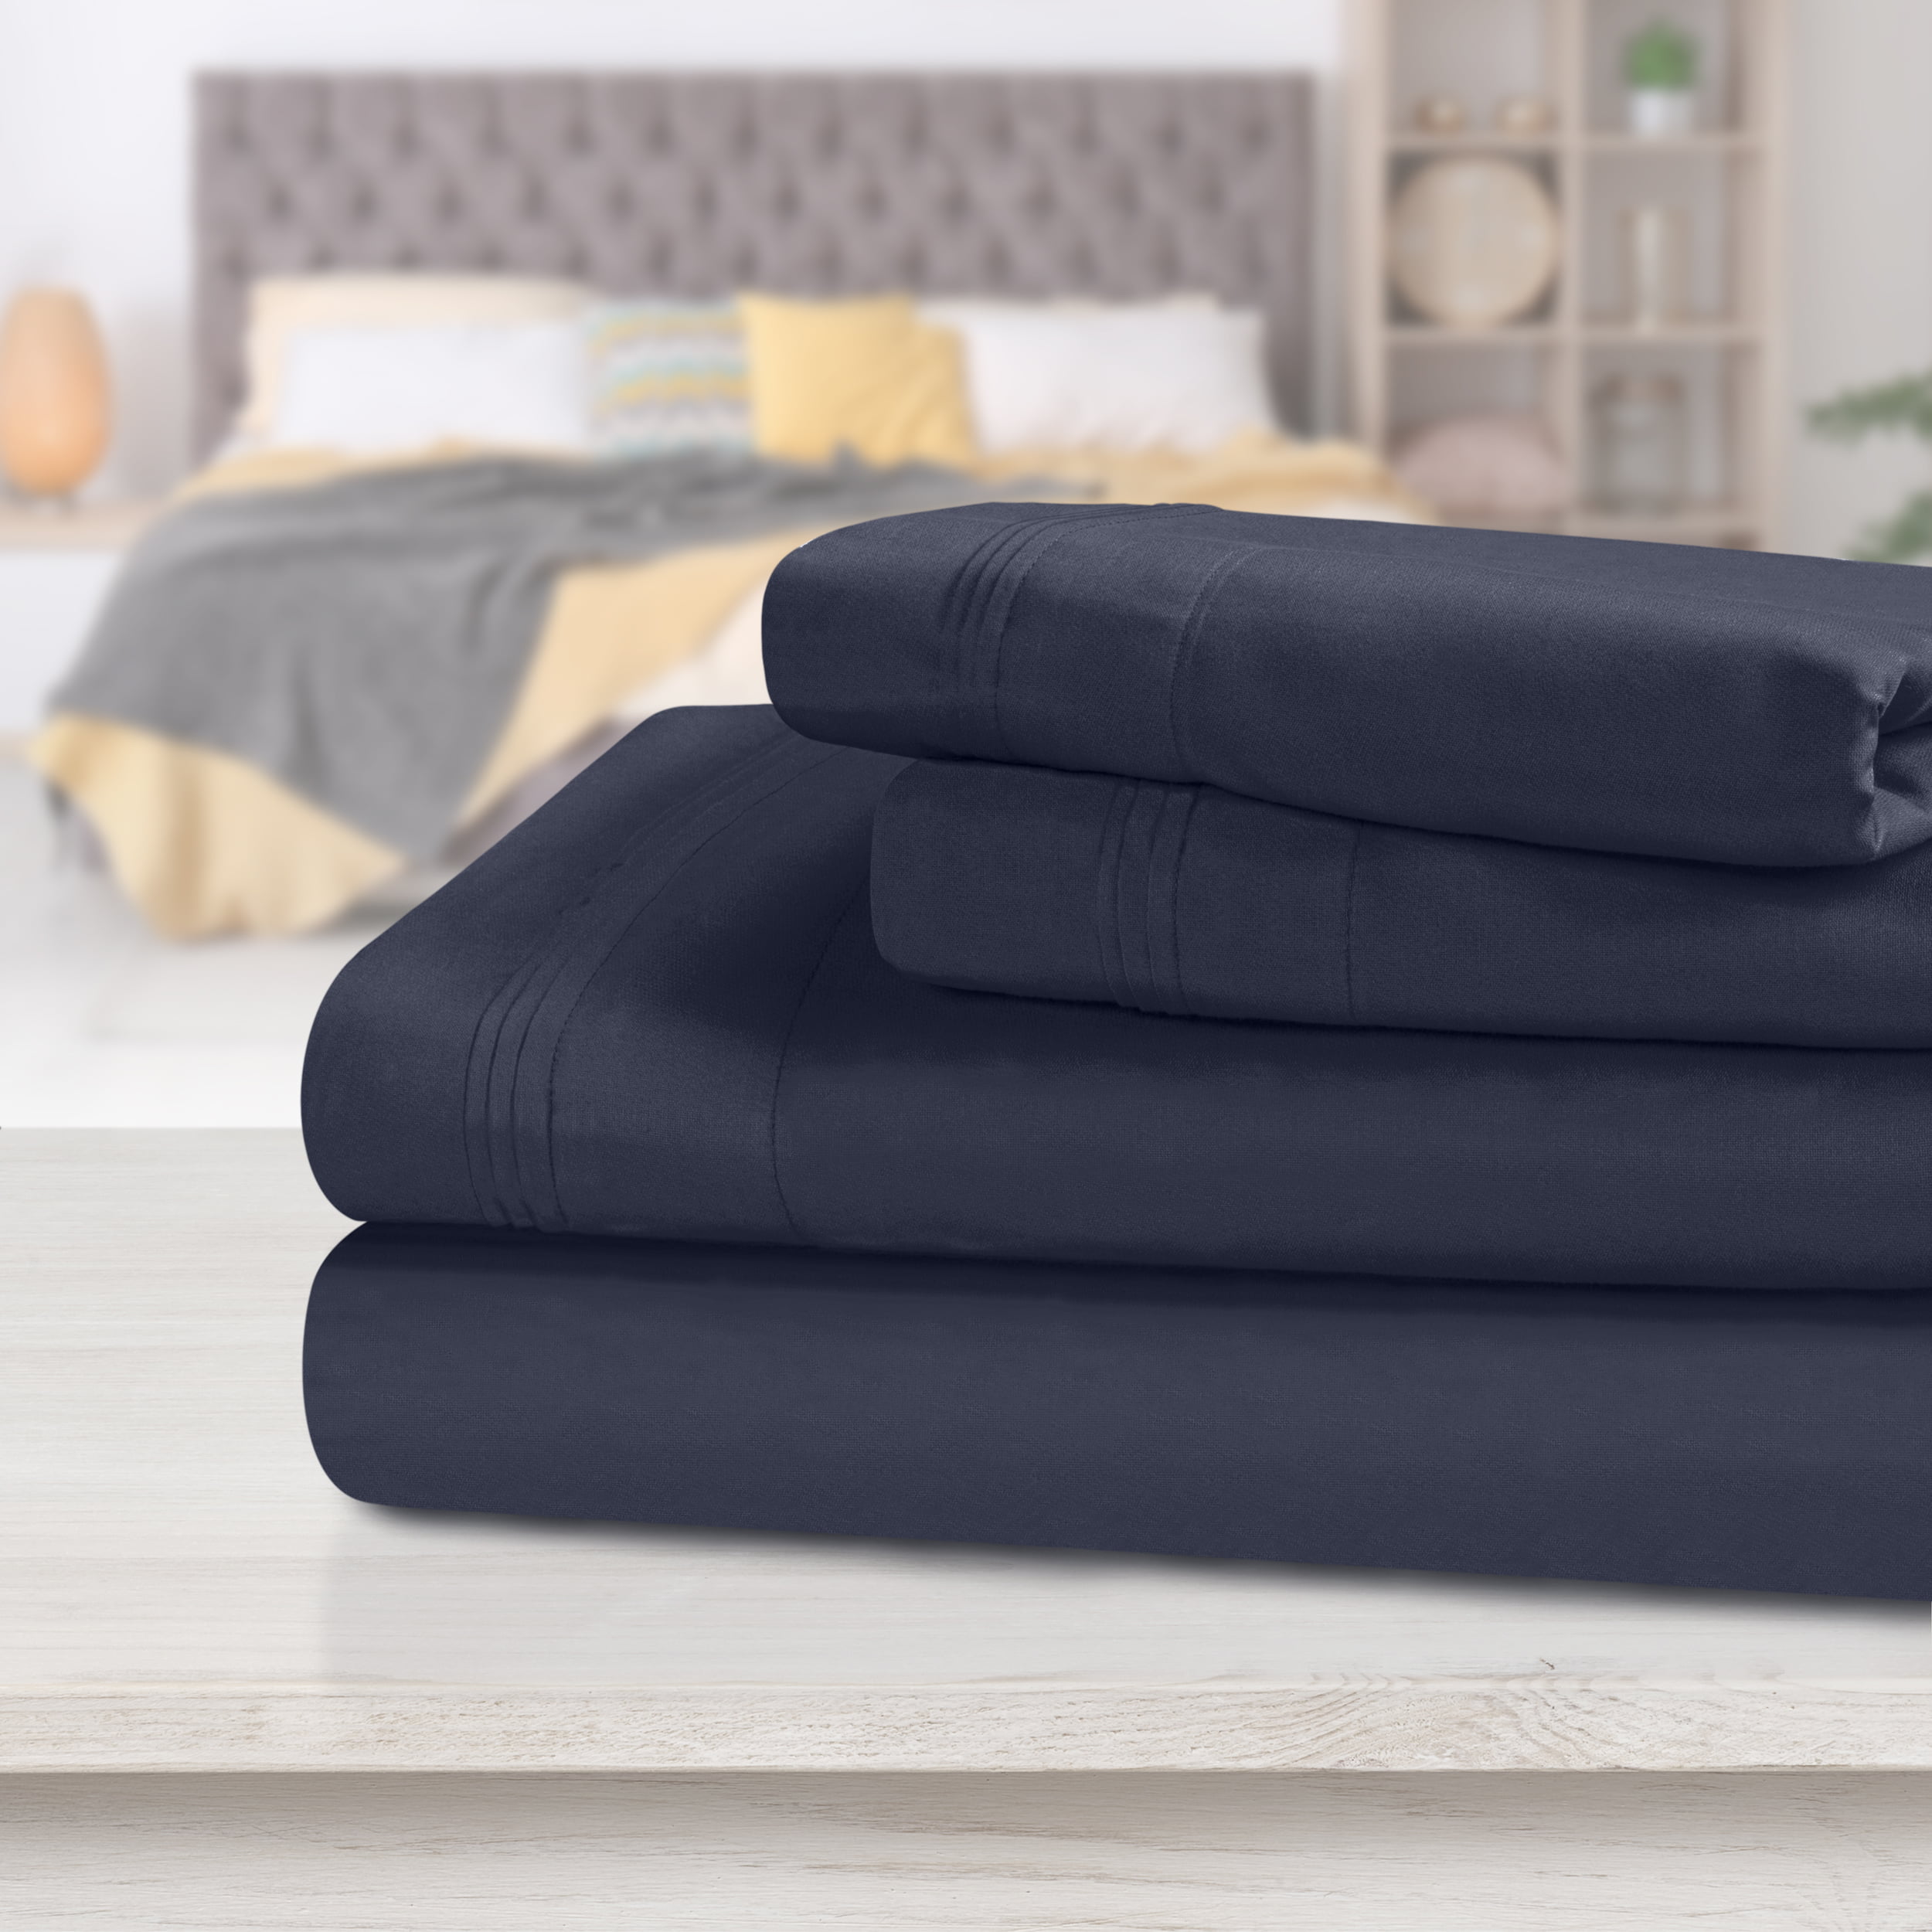 Olympic-Queen Size Extra Deep Pocket 3pc Fitted Sheet Set 1200TC Egyptian Cotton